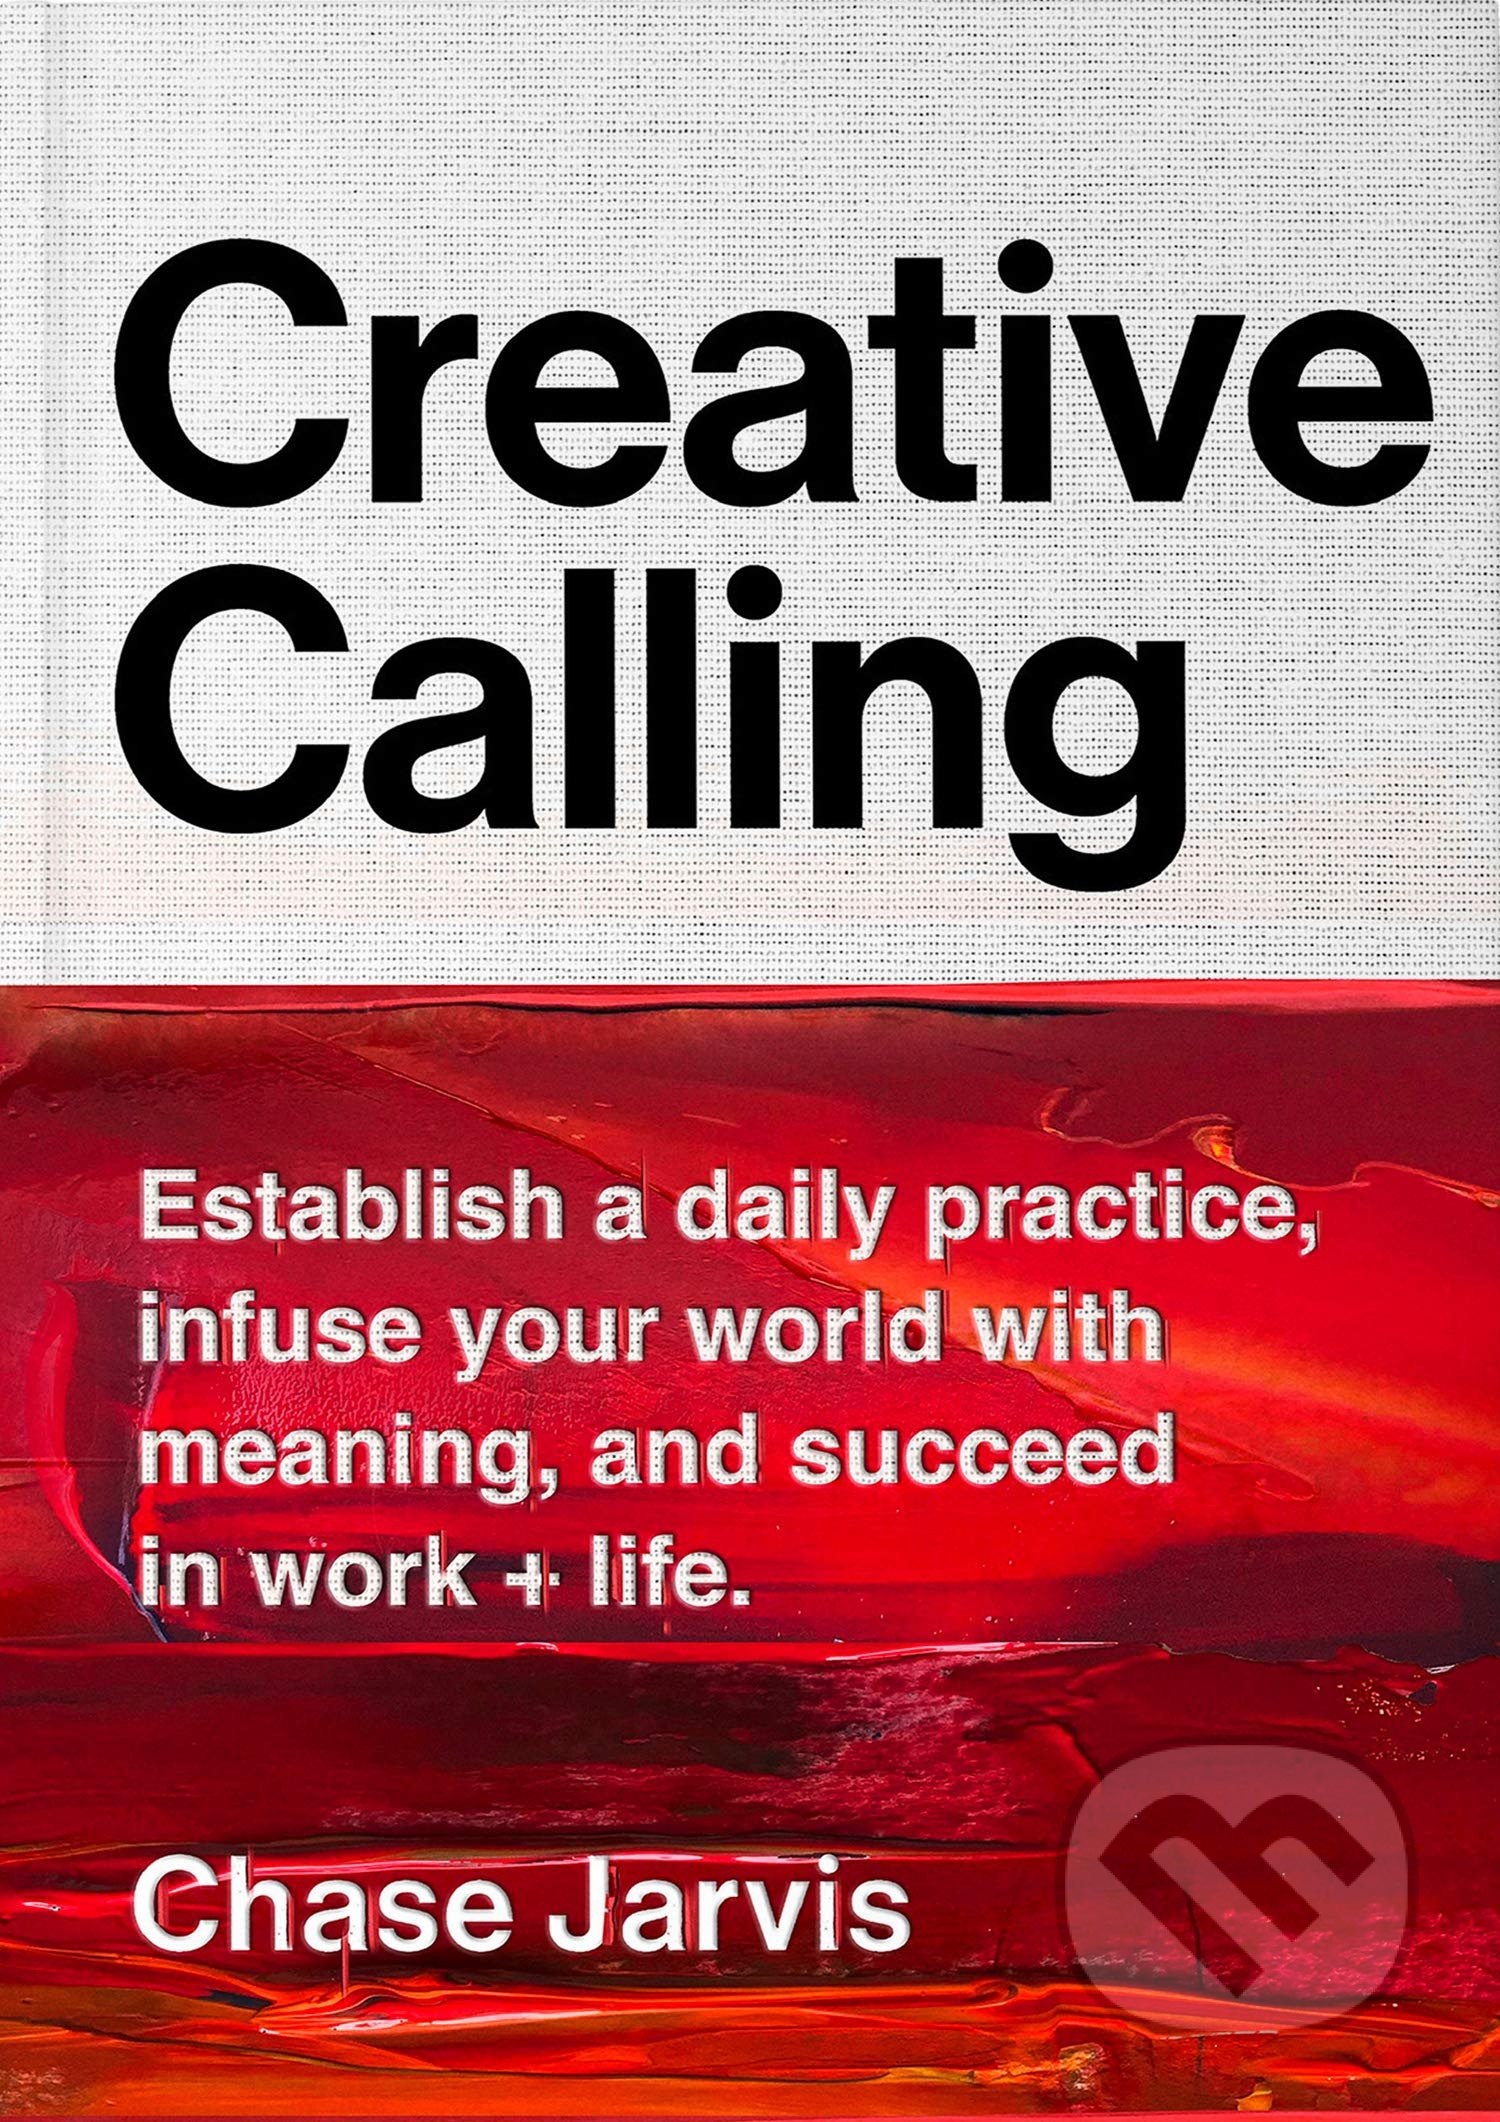 Creative Calling - Chase Jarvis, HarperCollins, 2019